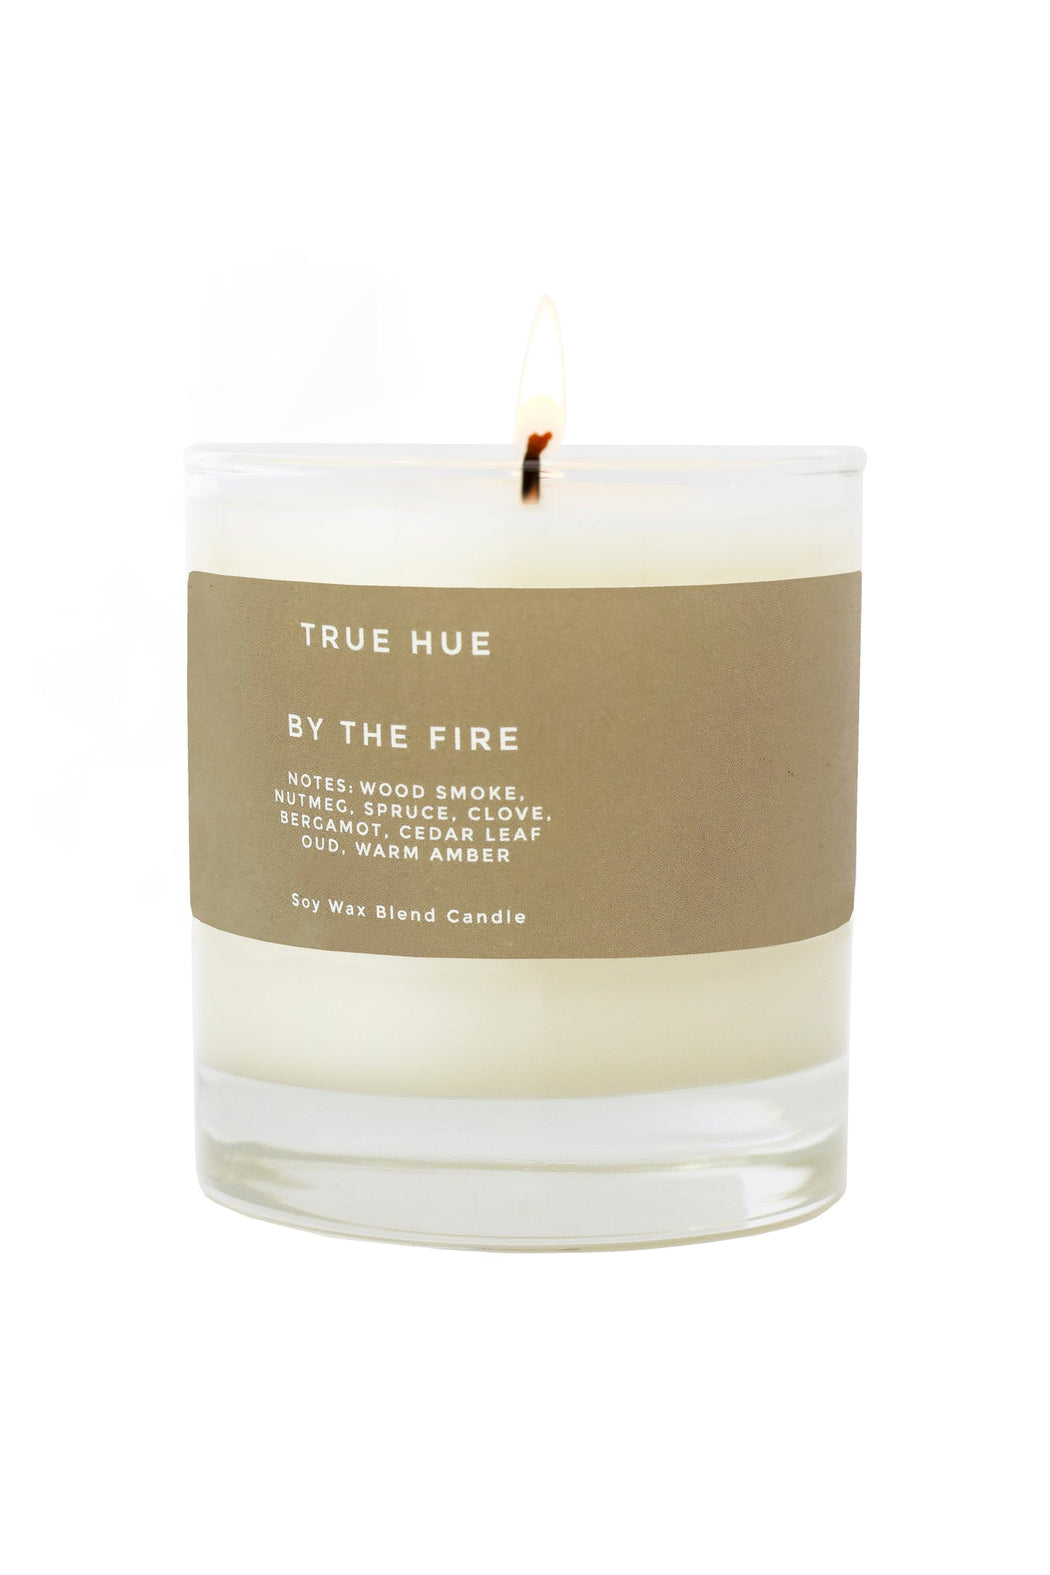 True Hue | By The Fire Candle | Hazel & Rose | Minneapolis